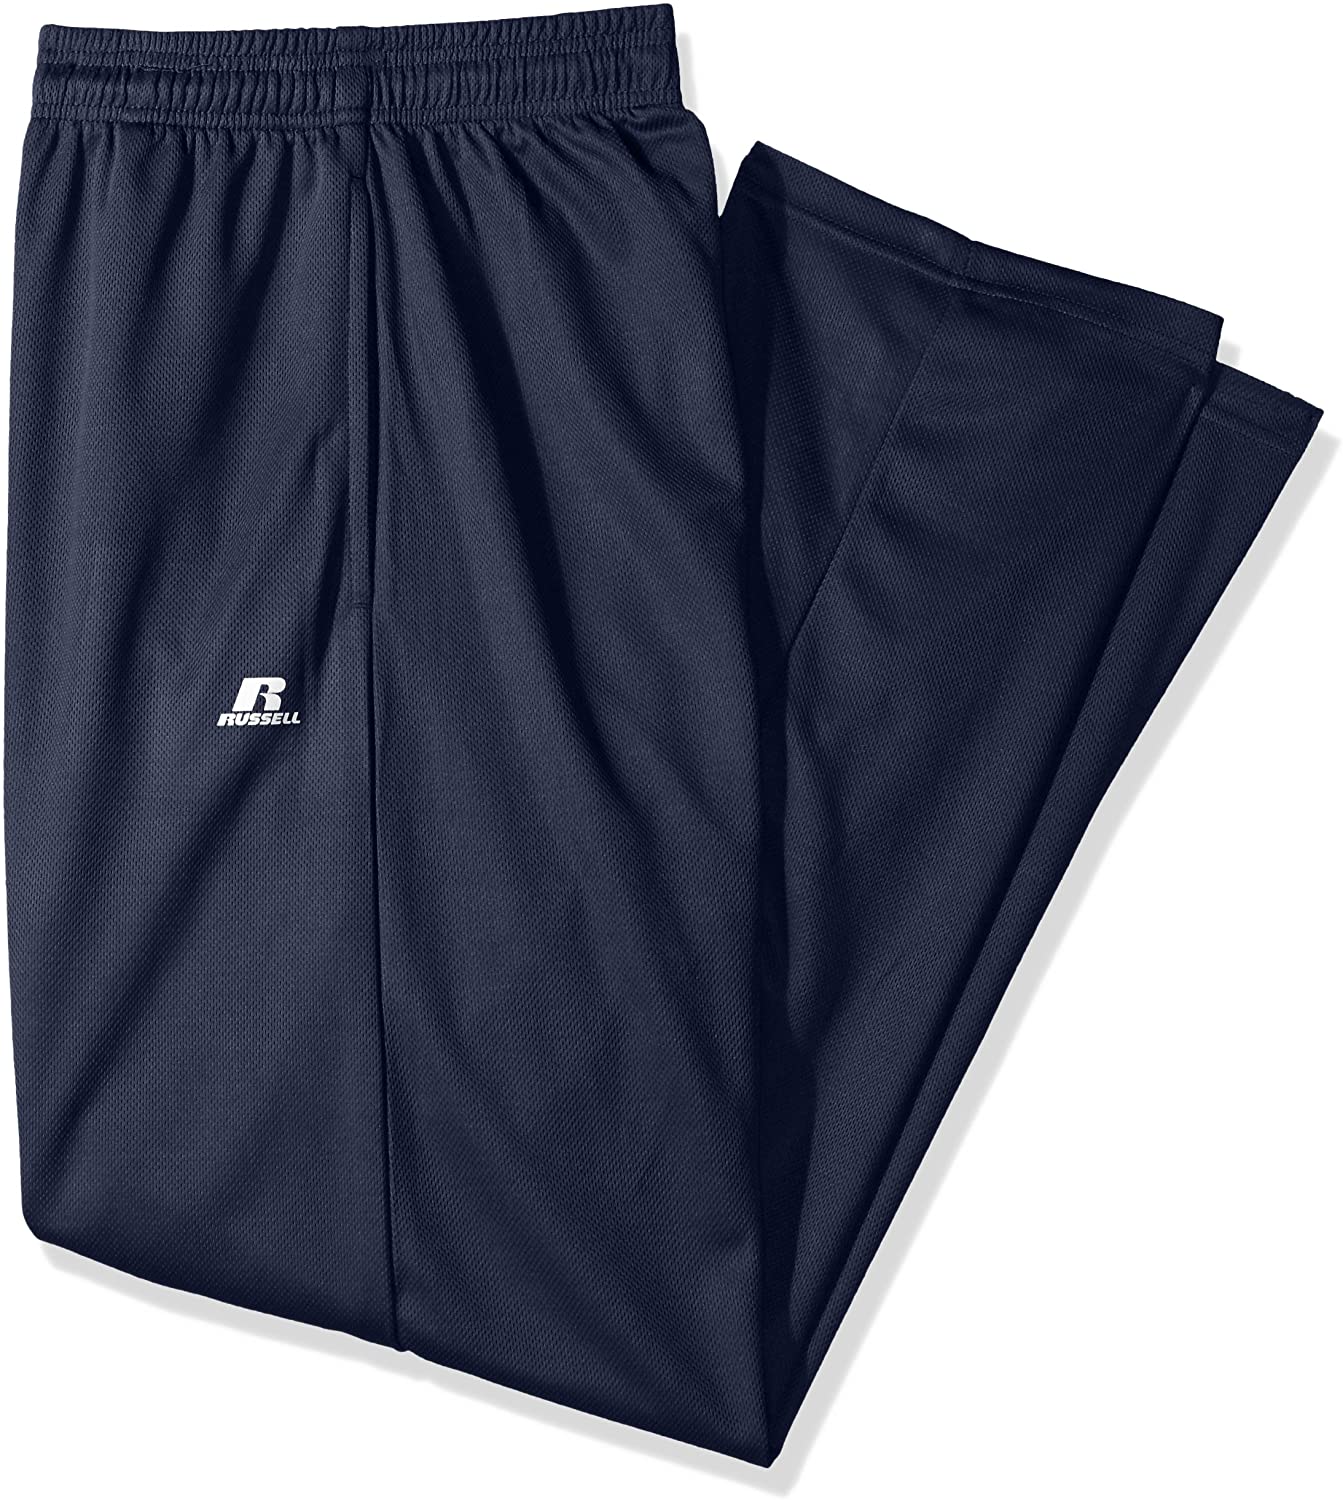 Russell Athletic Mens Big and Tall Dri-Power Short with Contrast Side Panel 